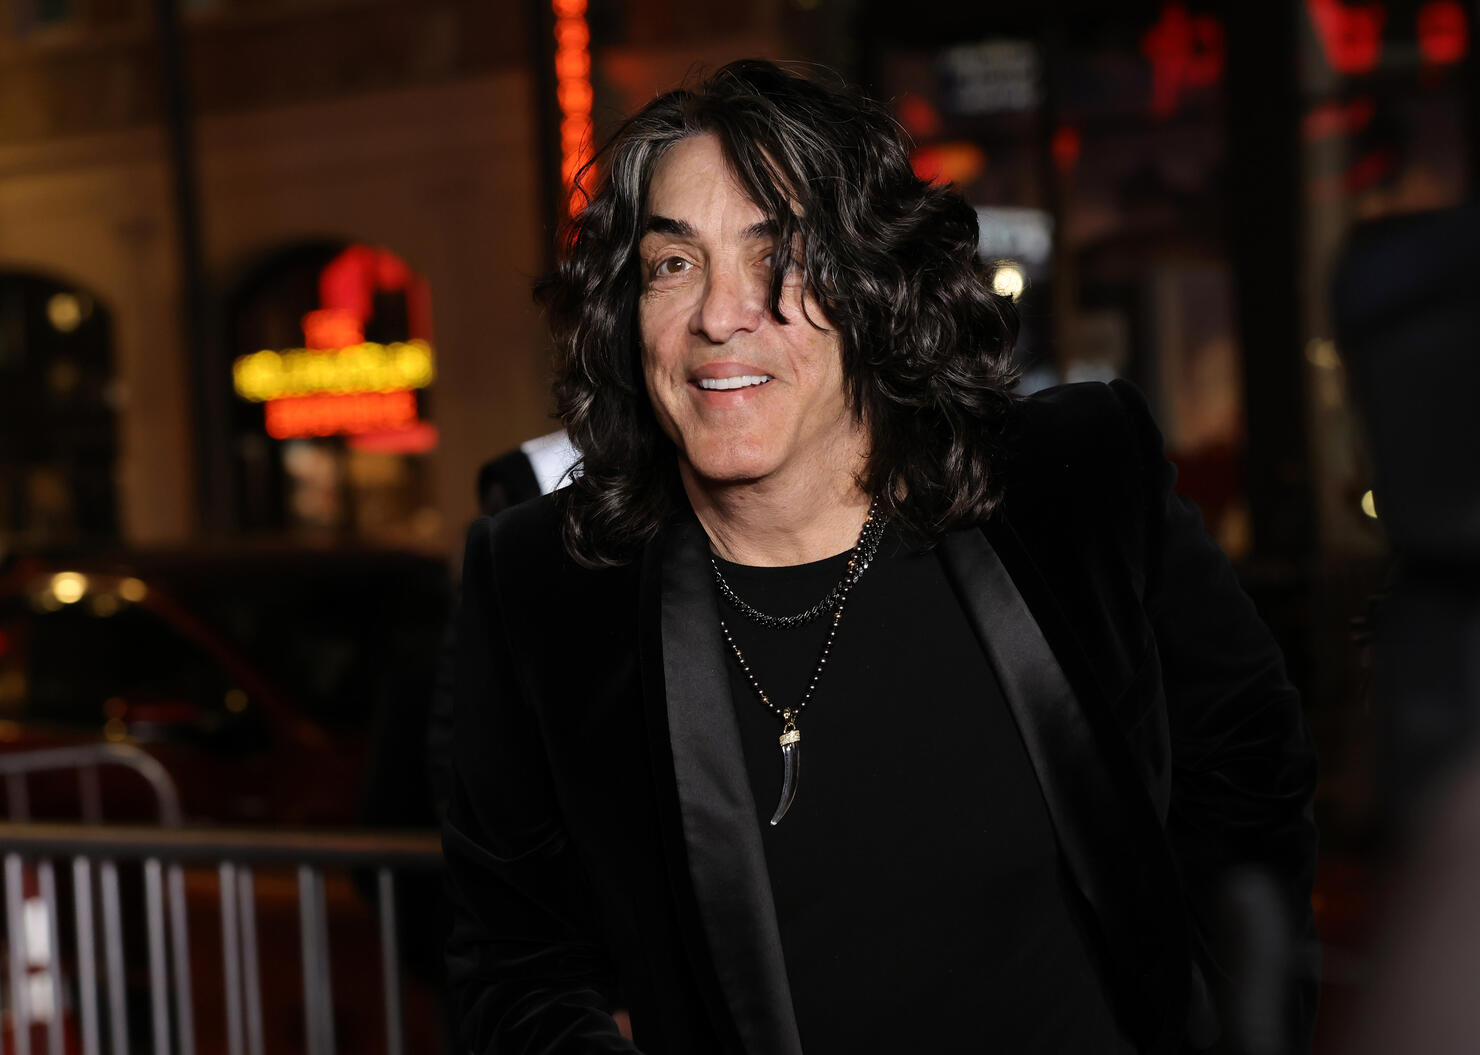 Paul Stanley of KISS welcomes fourth child - CBS News